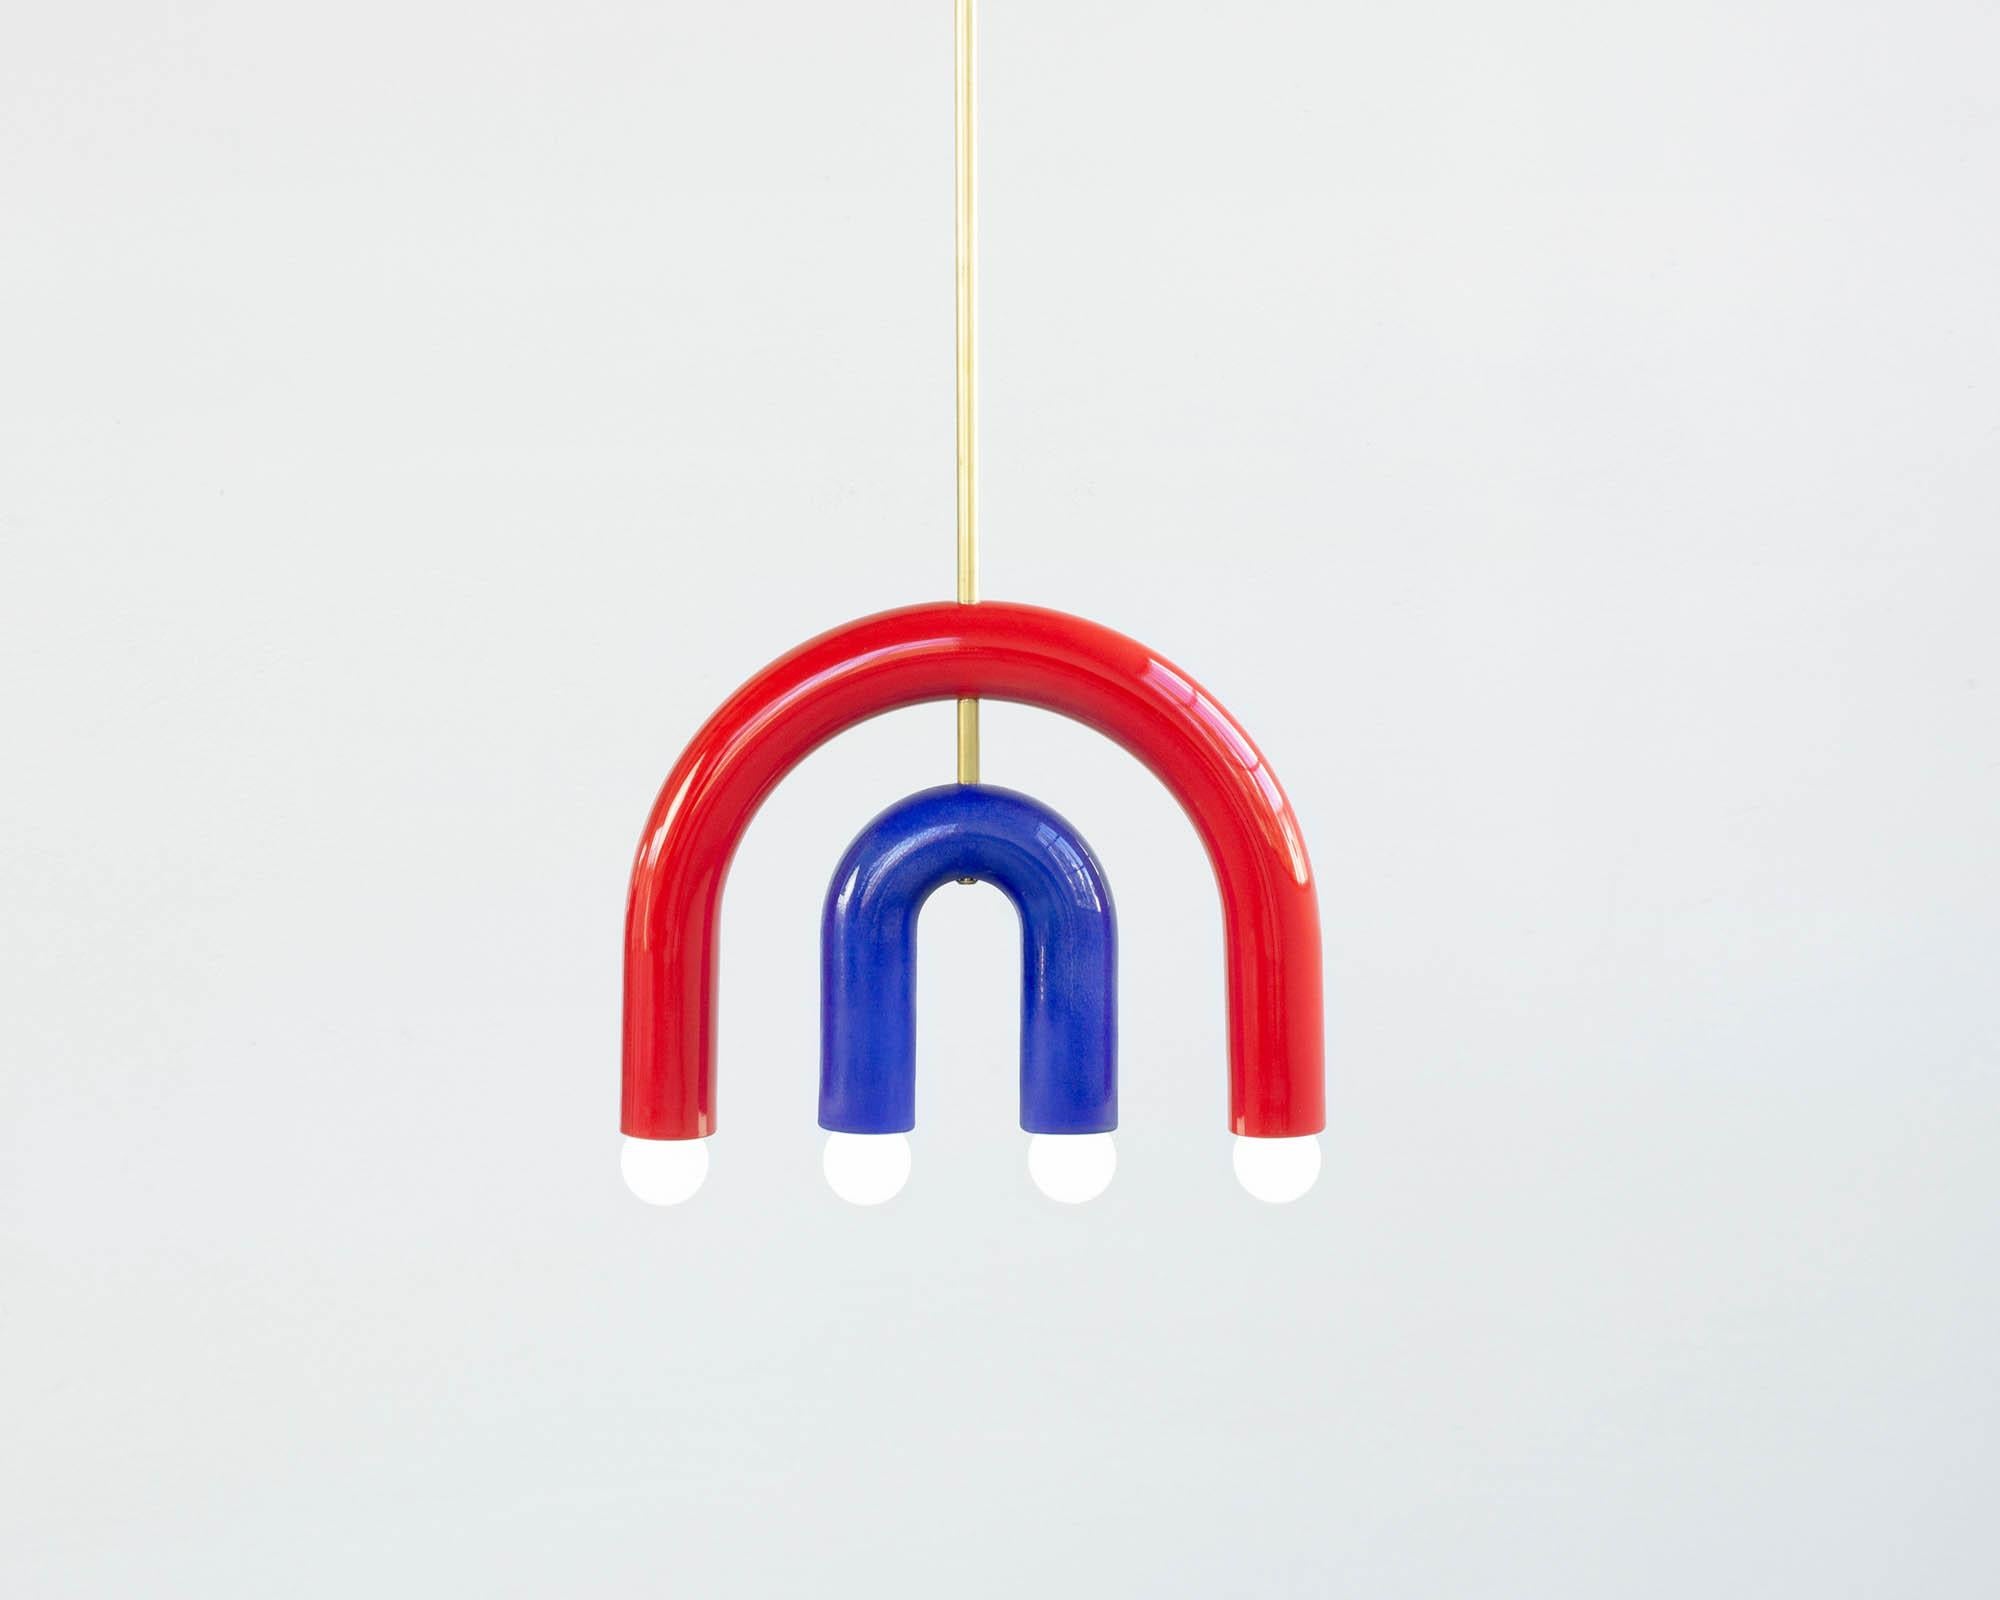 TRN C1 Pendant lamp / ceiling lamp / chandelier
Designer: Pani Jurek

Dimensions: H 27.5 x 35 x 5 cm
Model Shown: Red & cobalt blue

Bulb (not included): E27/E26, compatible with US electric system

Materials: Hand glazed ceramic and brass
Rod: